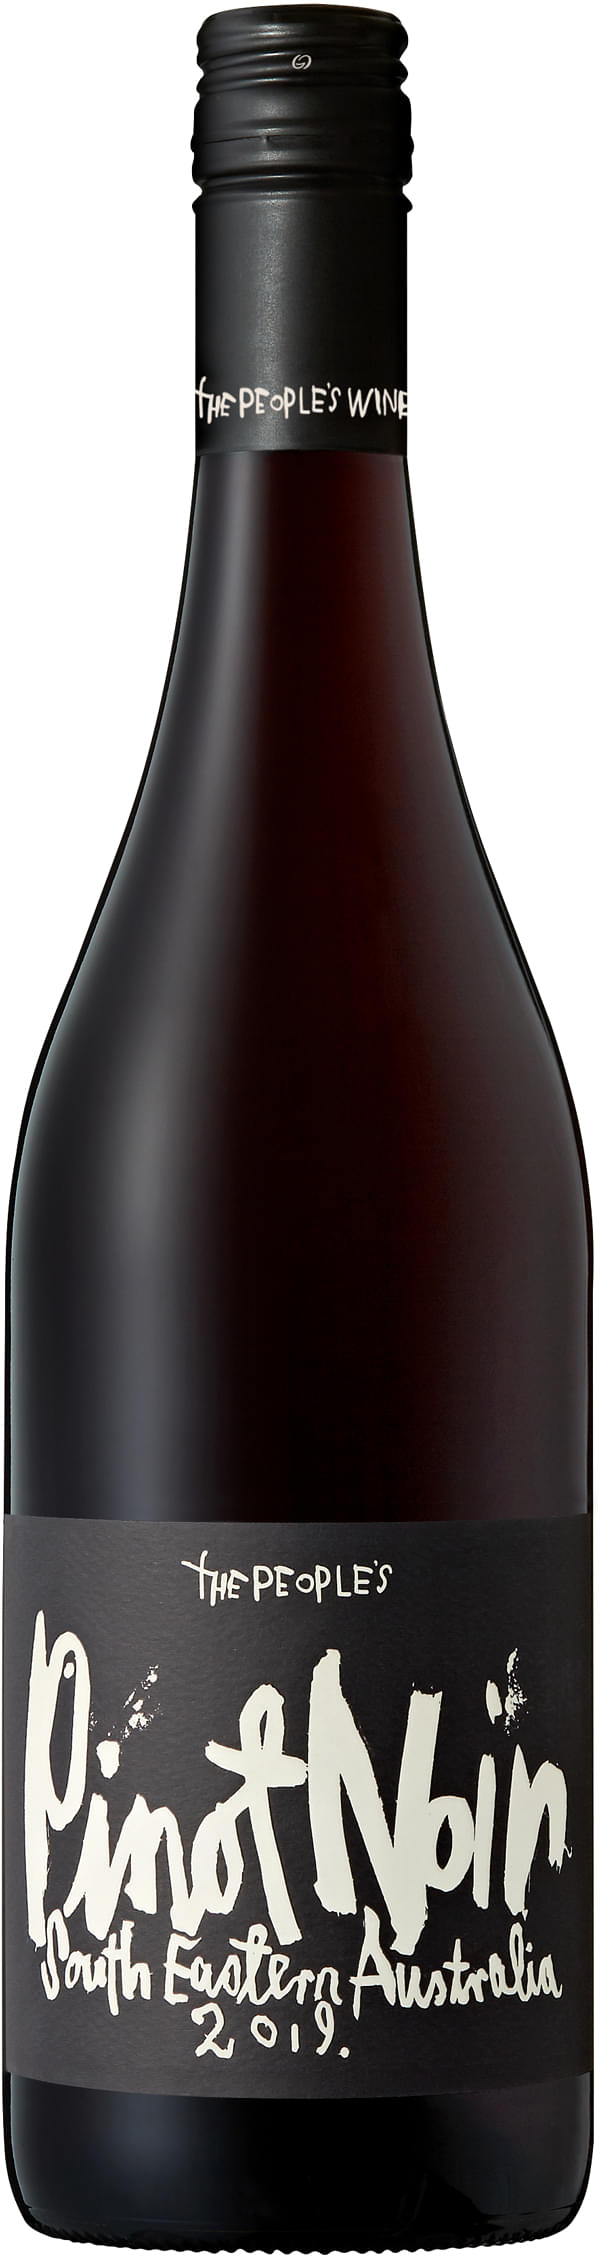 The People's Pinot Noir